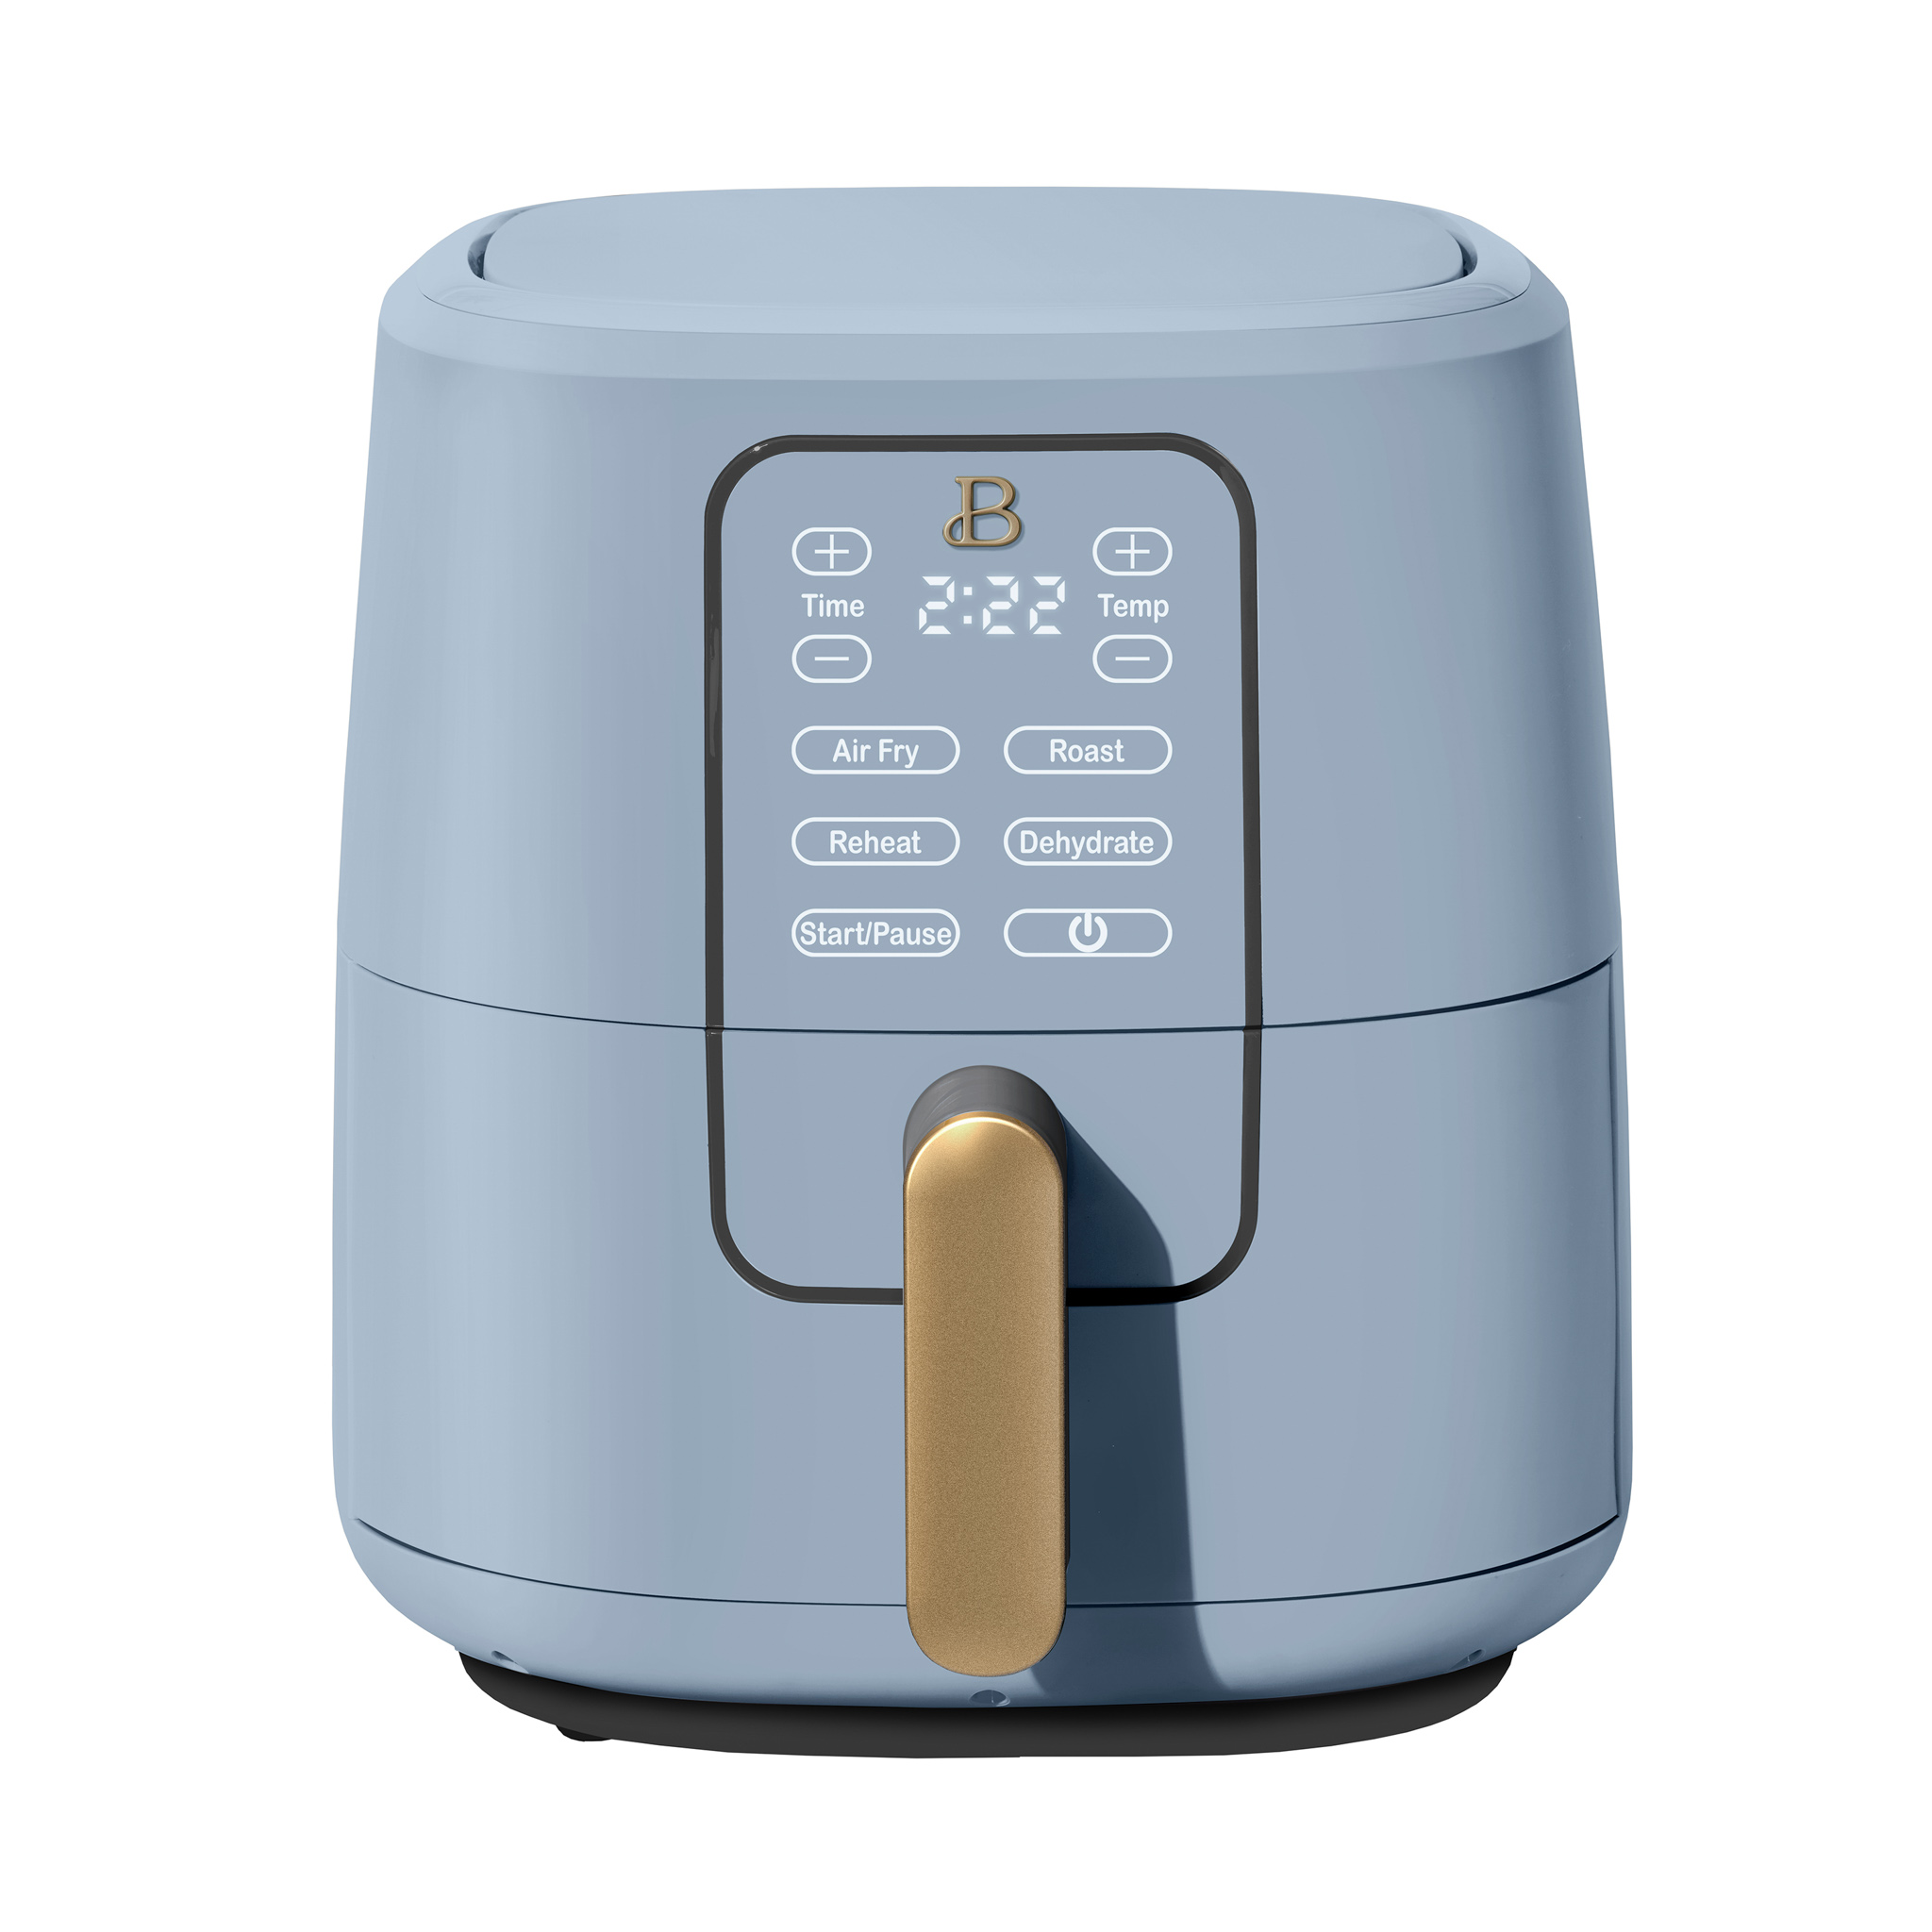 Beautiful 6 Qt Air Fryer with TurboCrisp Technology and Touch-Activated Display, Cornflower Blue by Drew Barrymore - image 1 of 9